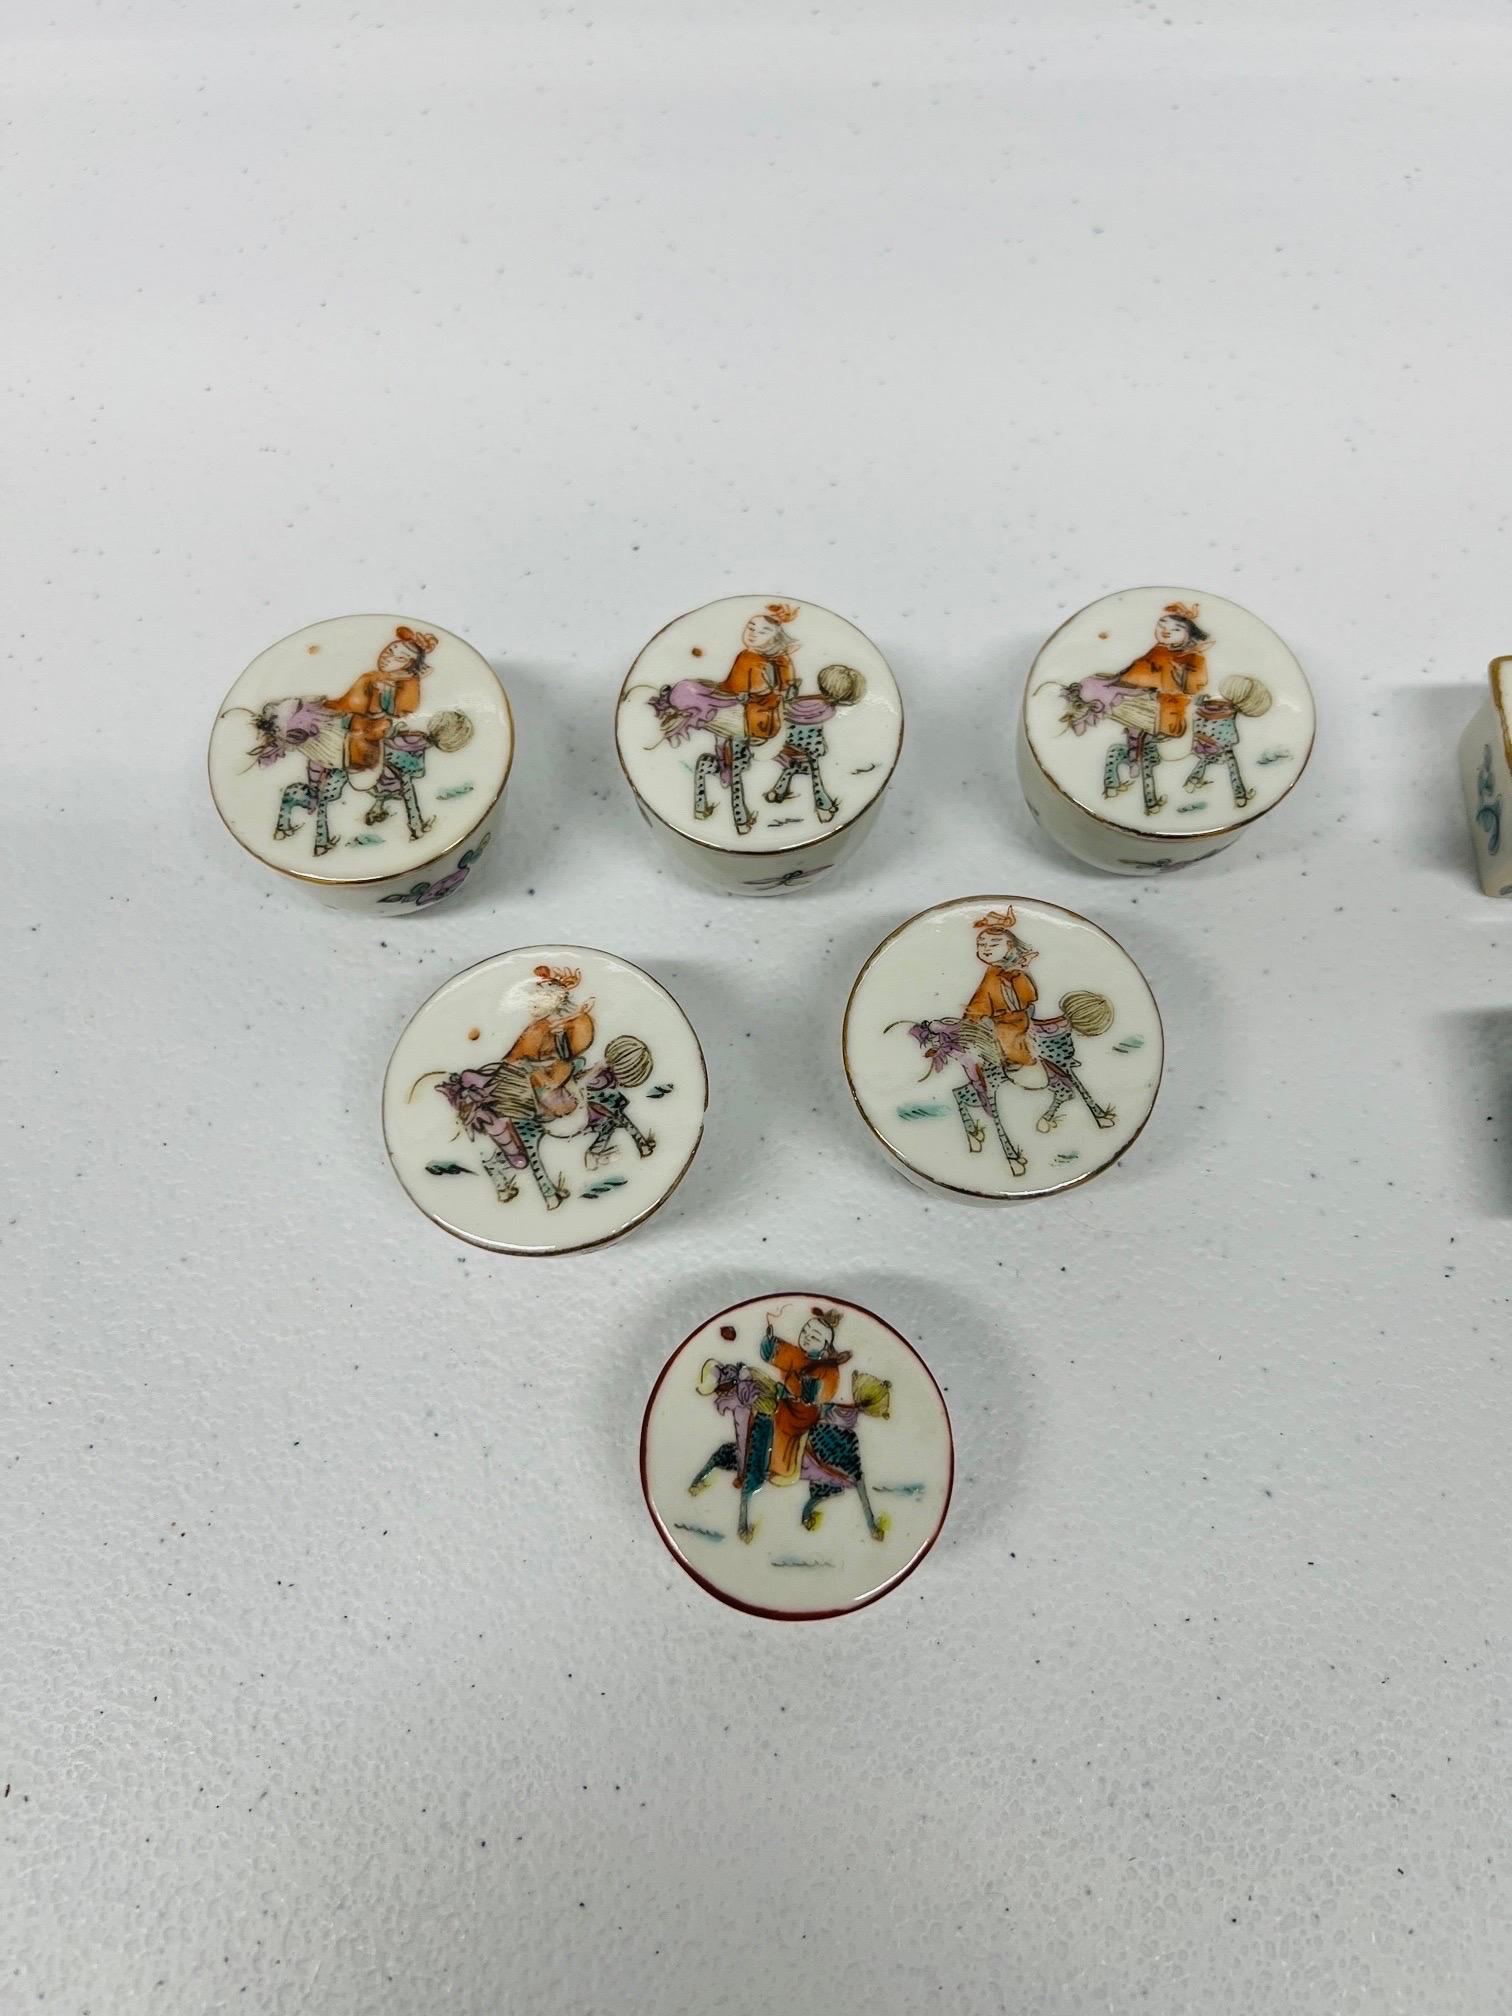 Chinese, Qing Dynasty (1644-1911), 19th century.

A grouping or instant collection of antique porcelain enameled salt boxes. Each box is decorated with immortal being riding the fabled Longma (winged horse with dragon scales). Six boxes are round